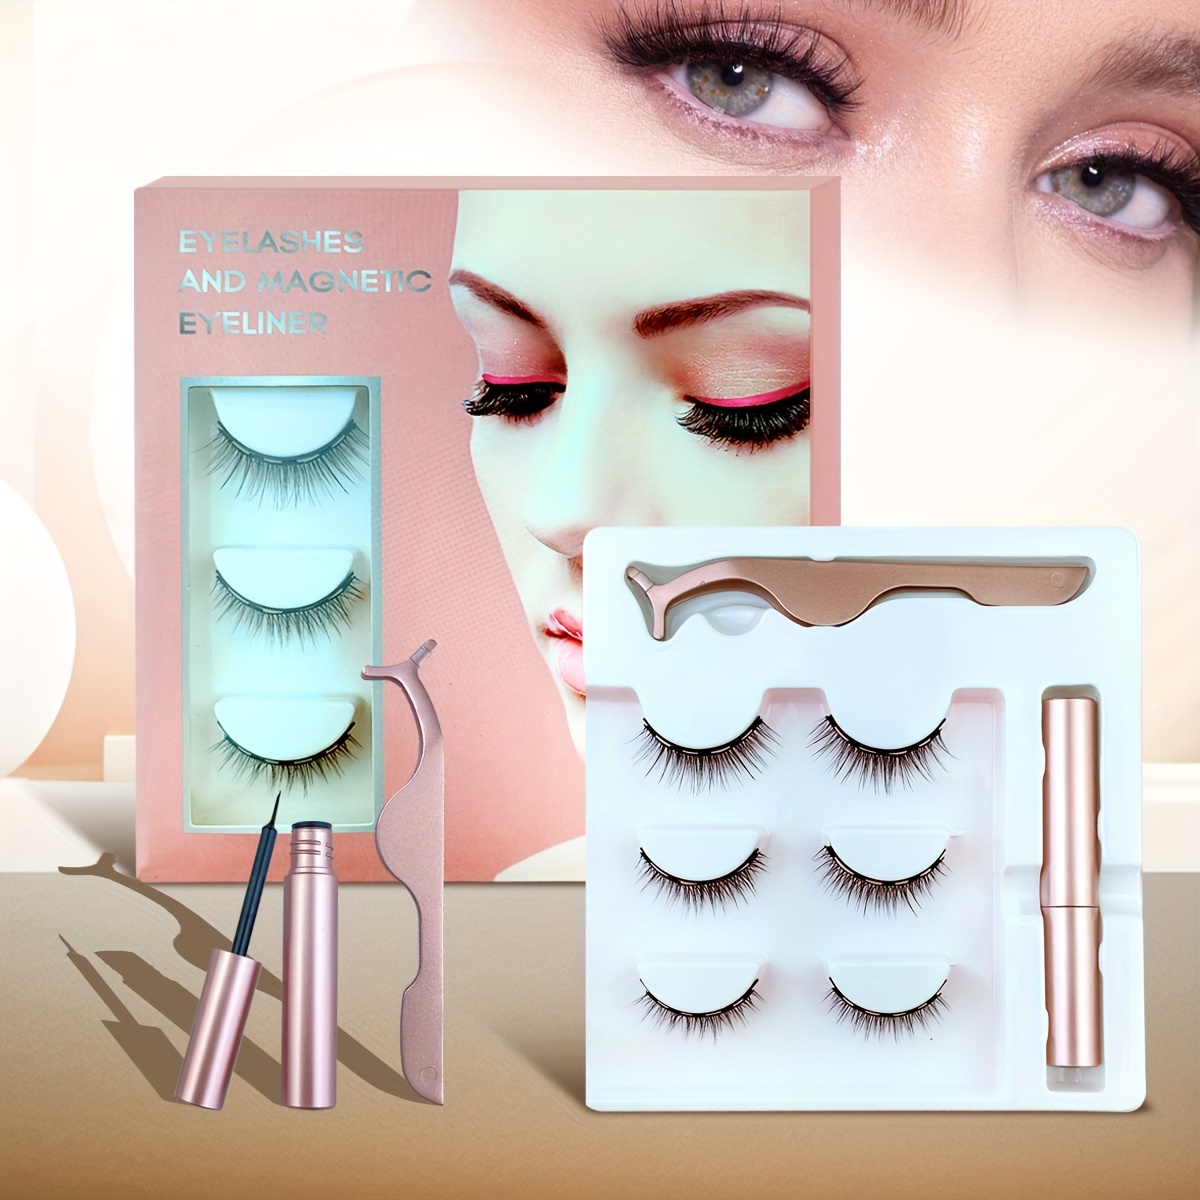 

3d Magnetic Eyelashes With Eyeliner Kit, Natural And Long Magnetic False Lashes With Eyeliner Long Lasting, 3 Pairs Reusable Fake Eyelashes With Tweezers, No Glue Needed, Easy To Wear